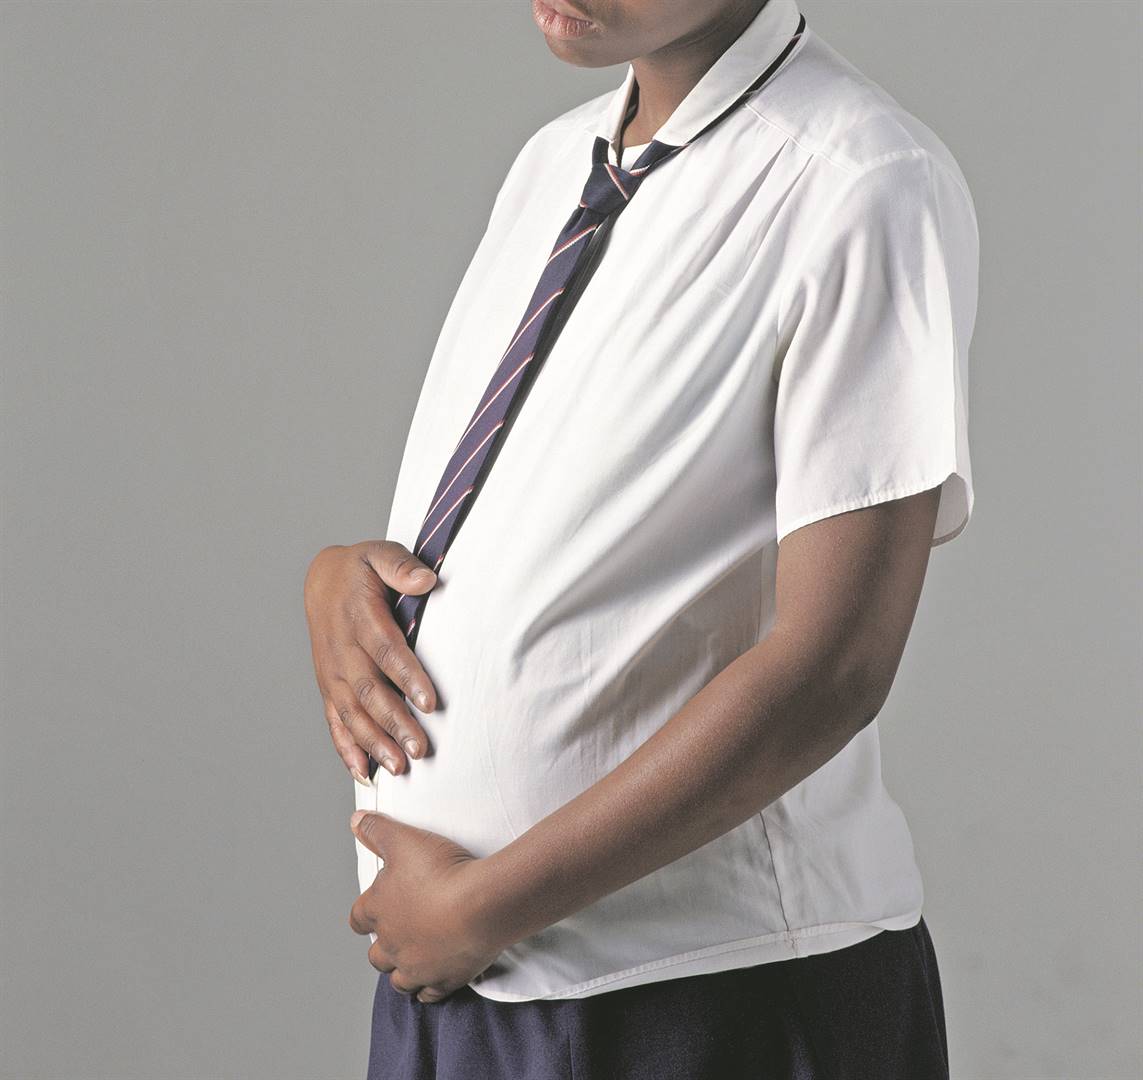 A young pregnant teenager holding her swelling belly and thinking forlornly about her future and imminent motherhood.